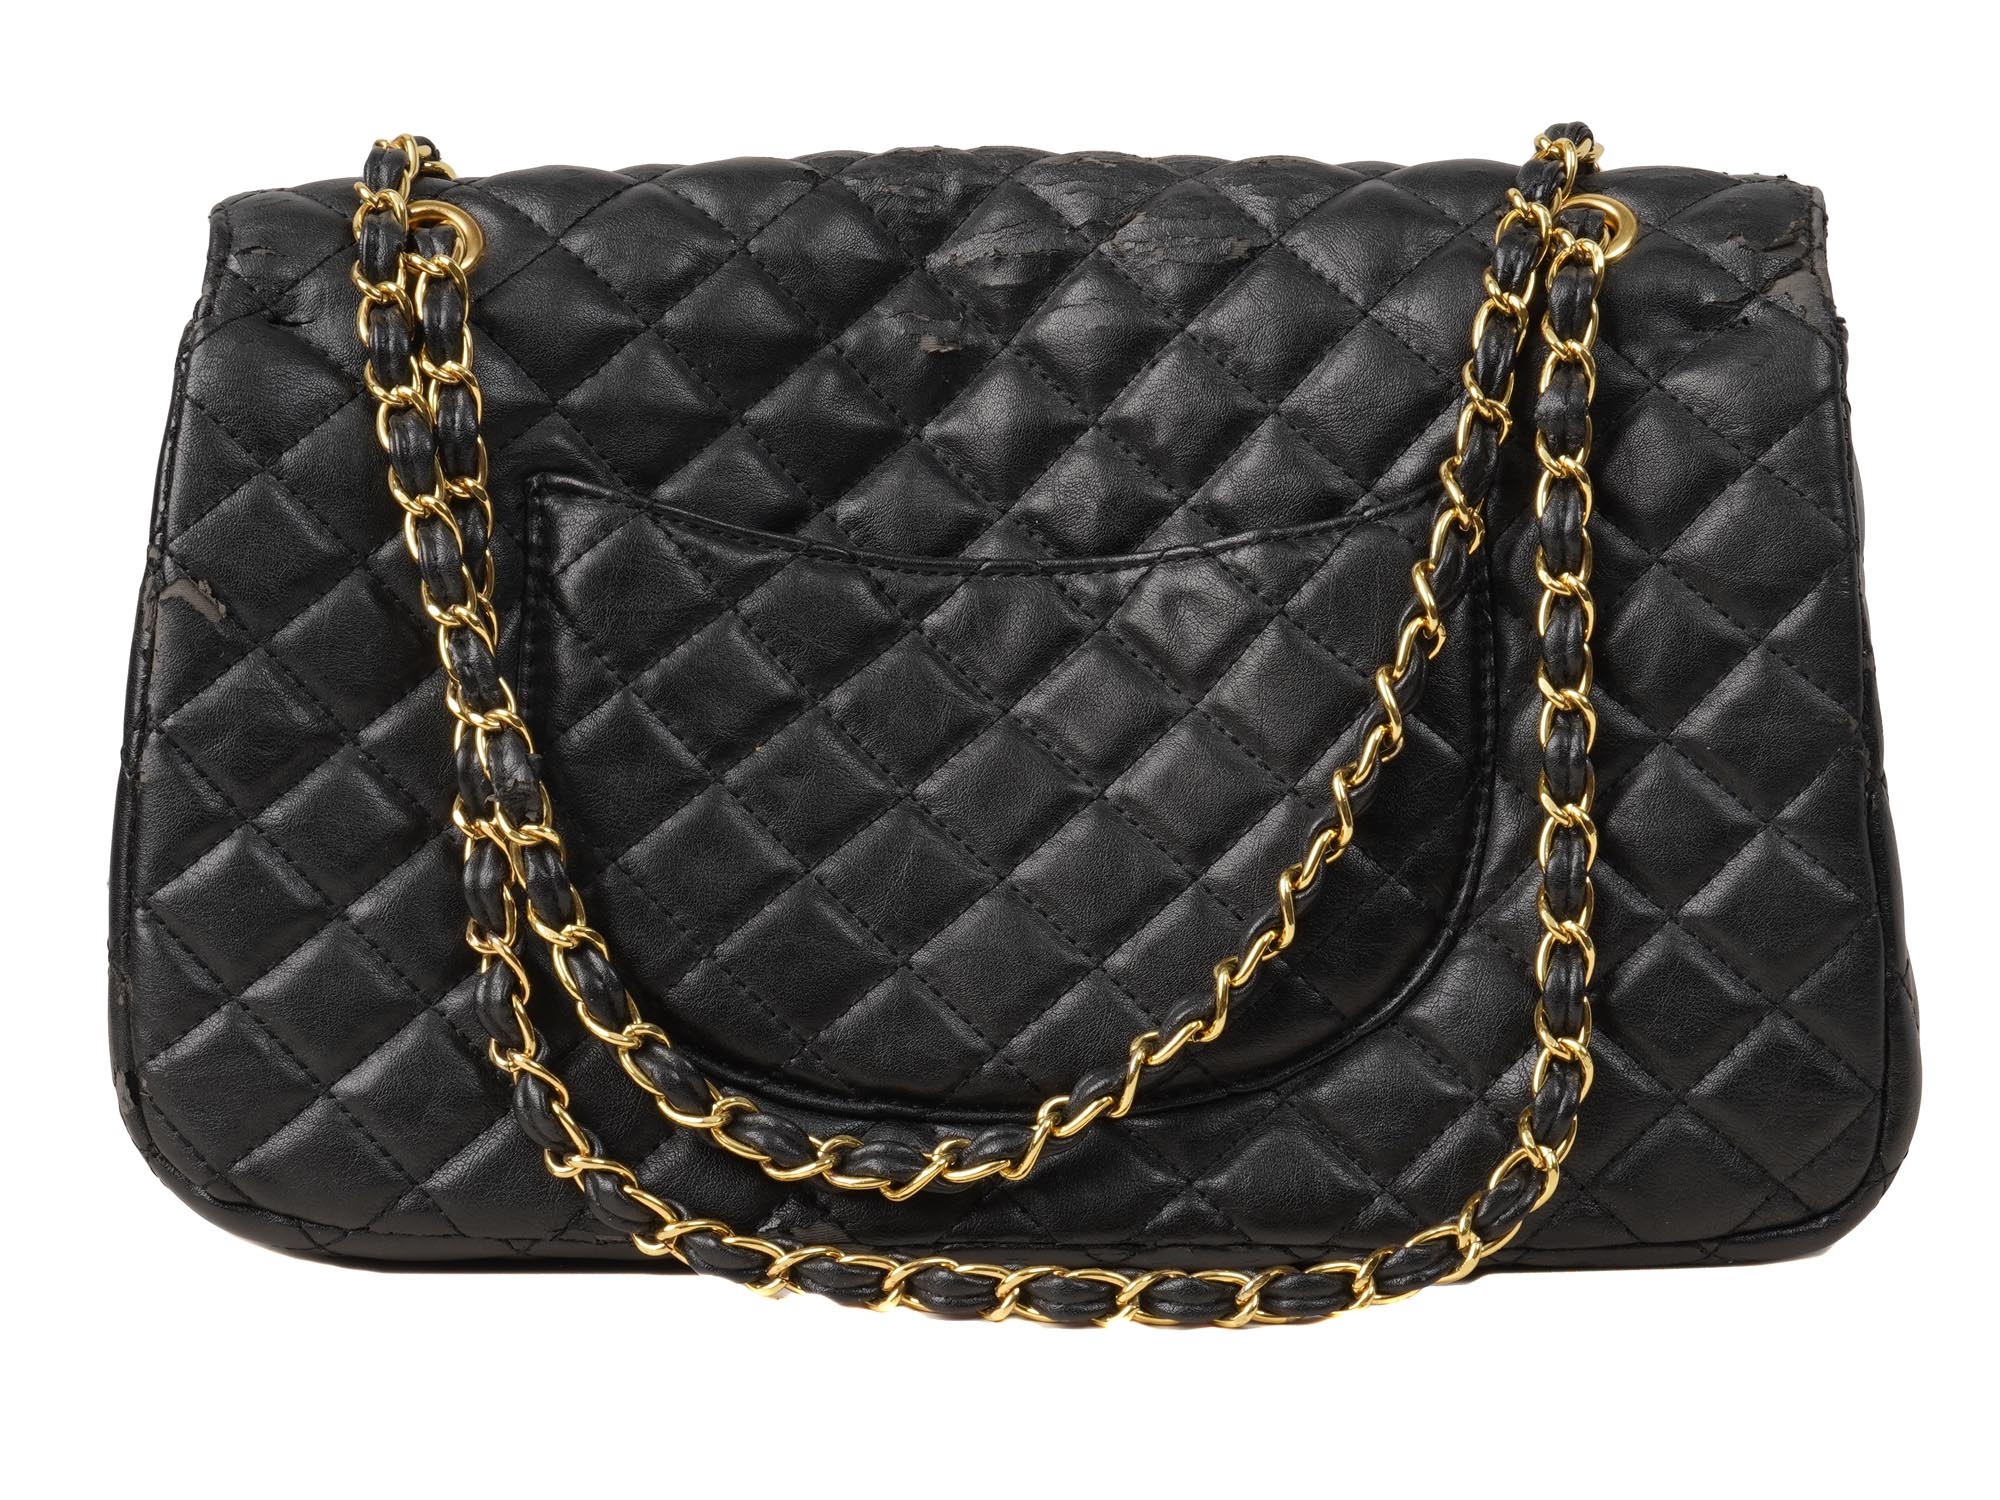 CHANEL STYLE FLAP QUILTED BLACK LEATHER BAG PURSE PIC-2